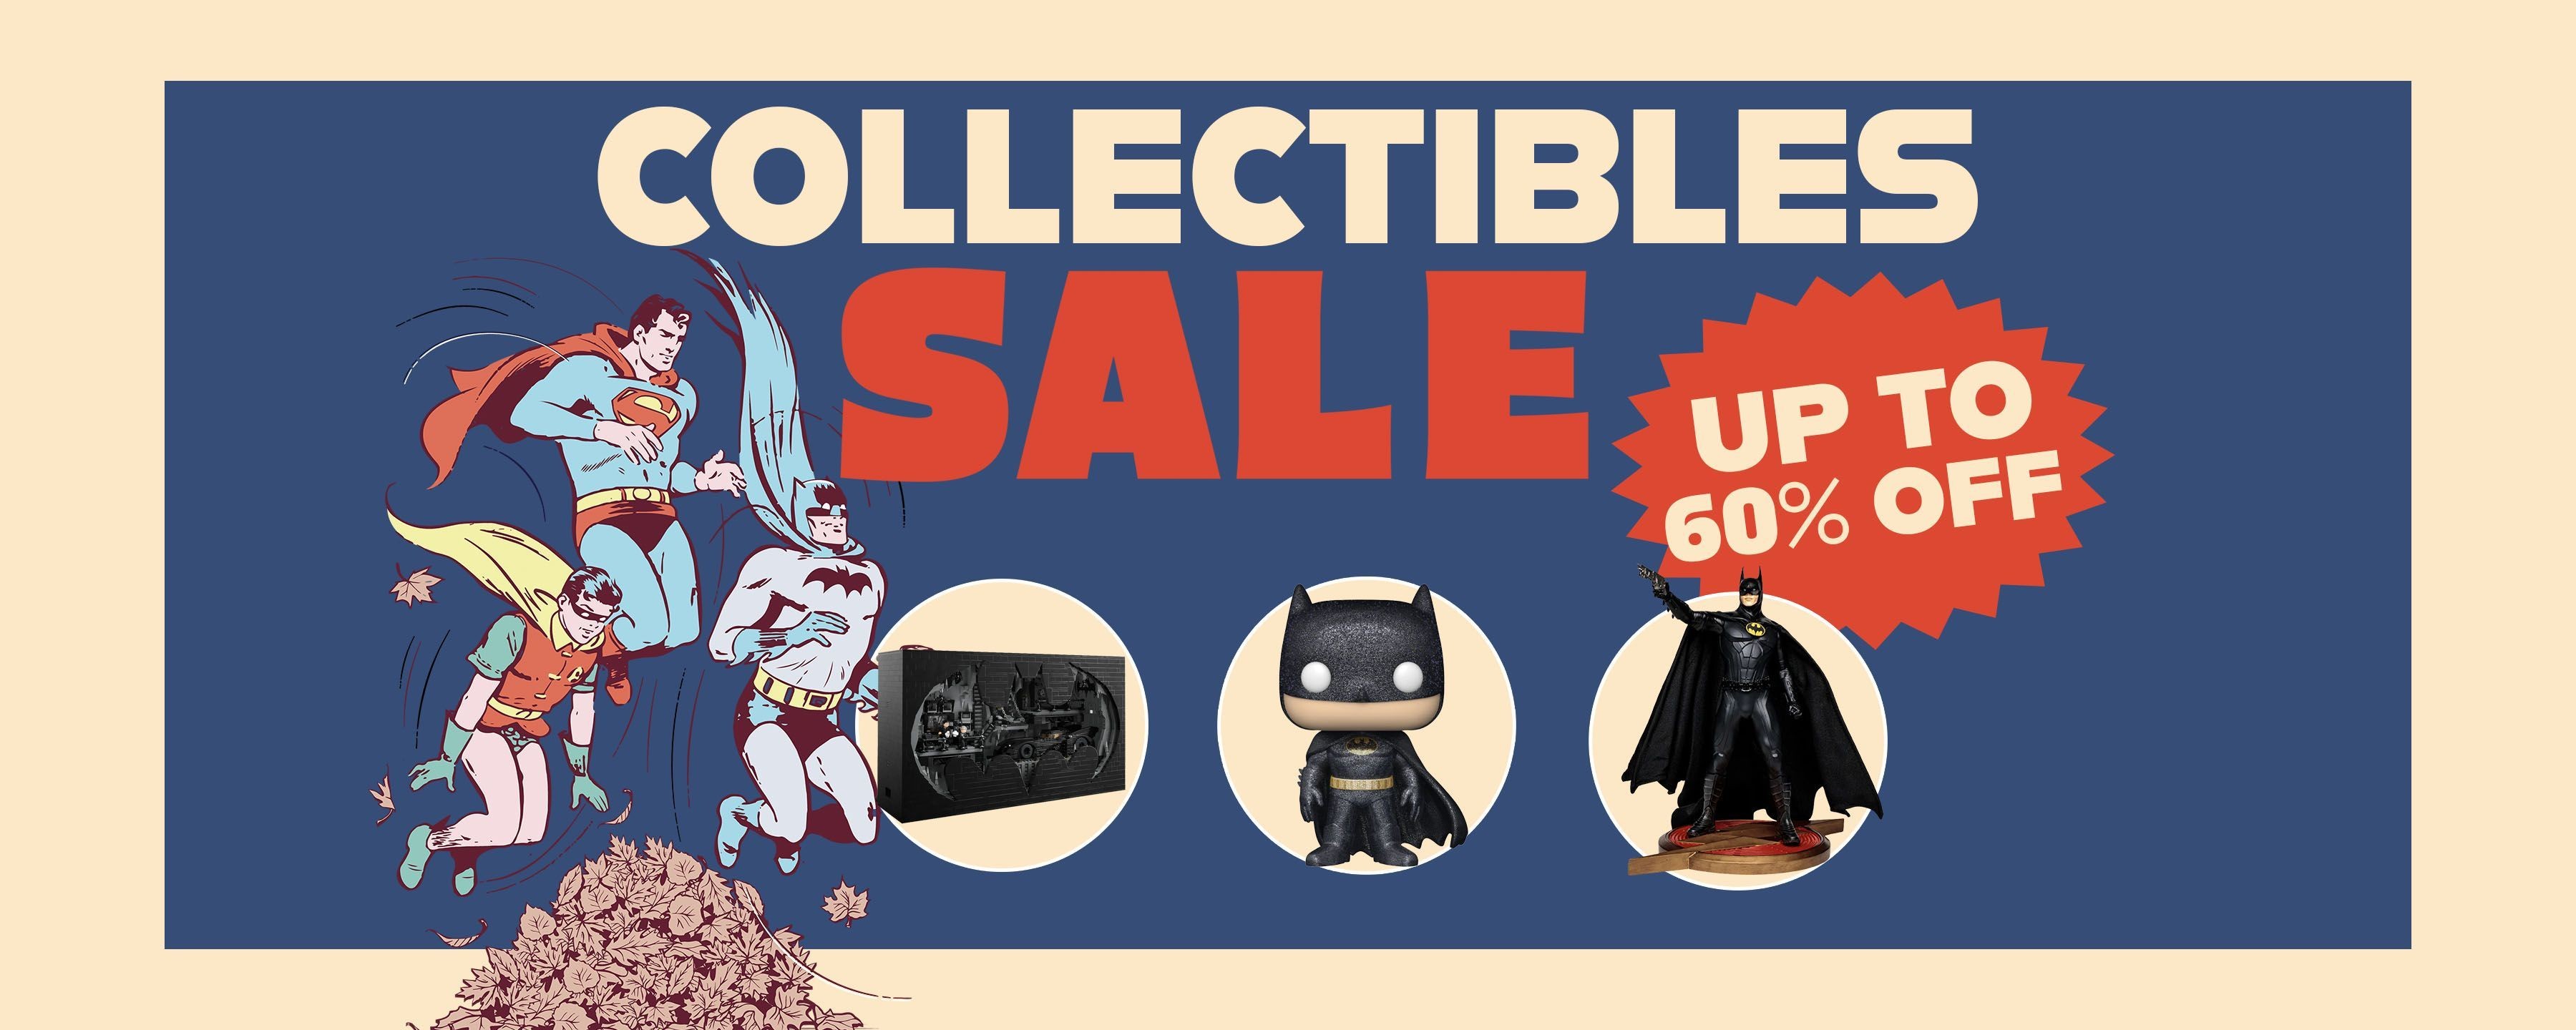 Collectibles Sale